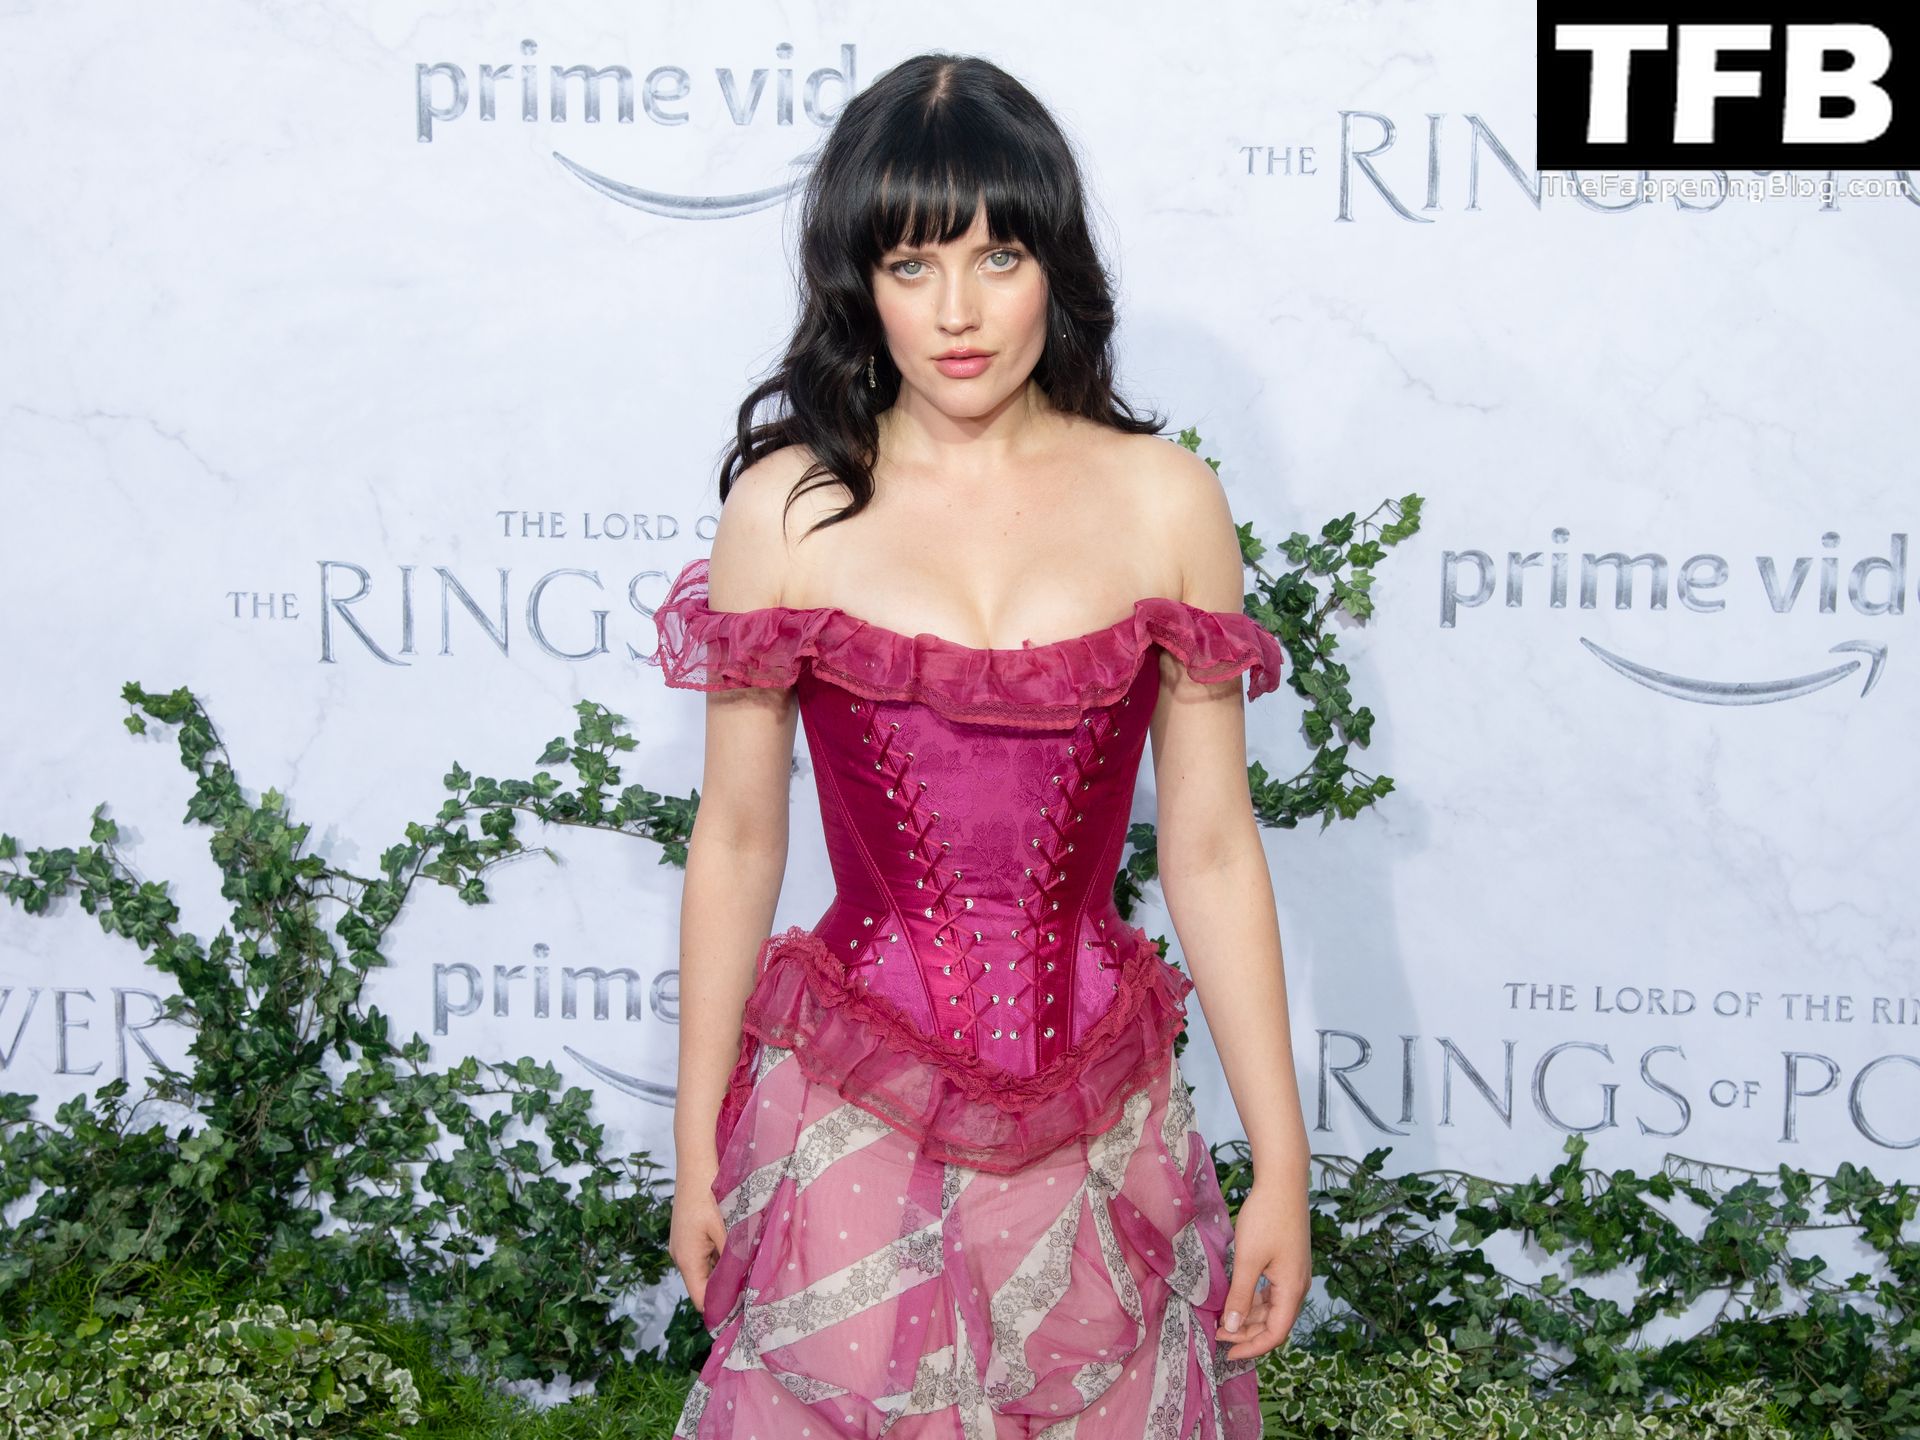 Markella Kavenagh Flaunts Her Cleavage at the Premiere of “The Lord of the Rings: The Rings of Power” in LA (40 Photos)